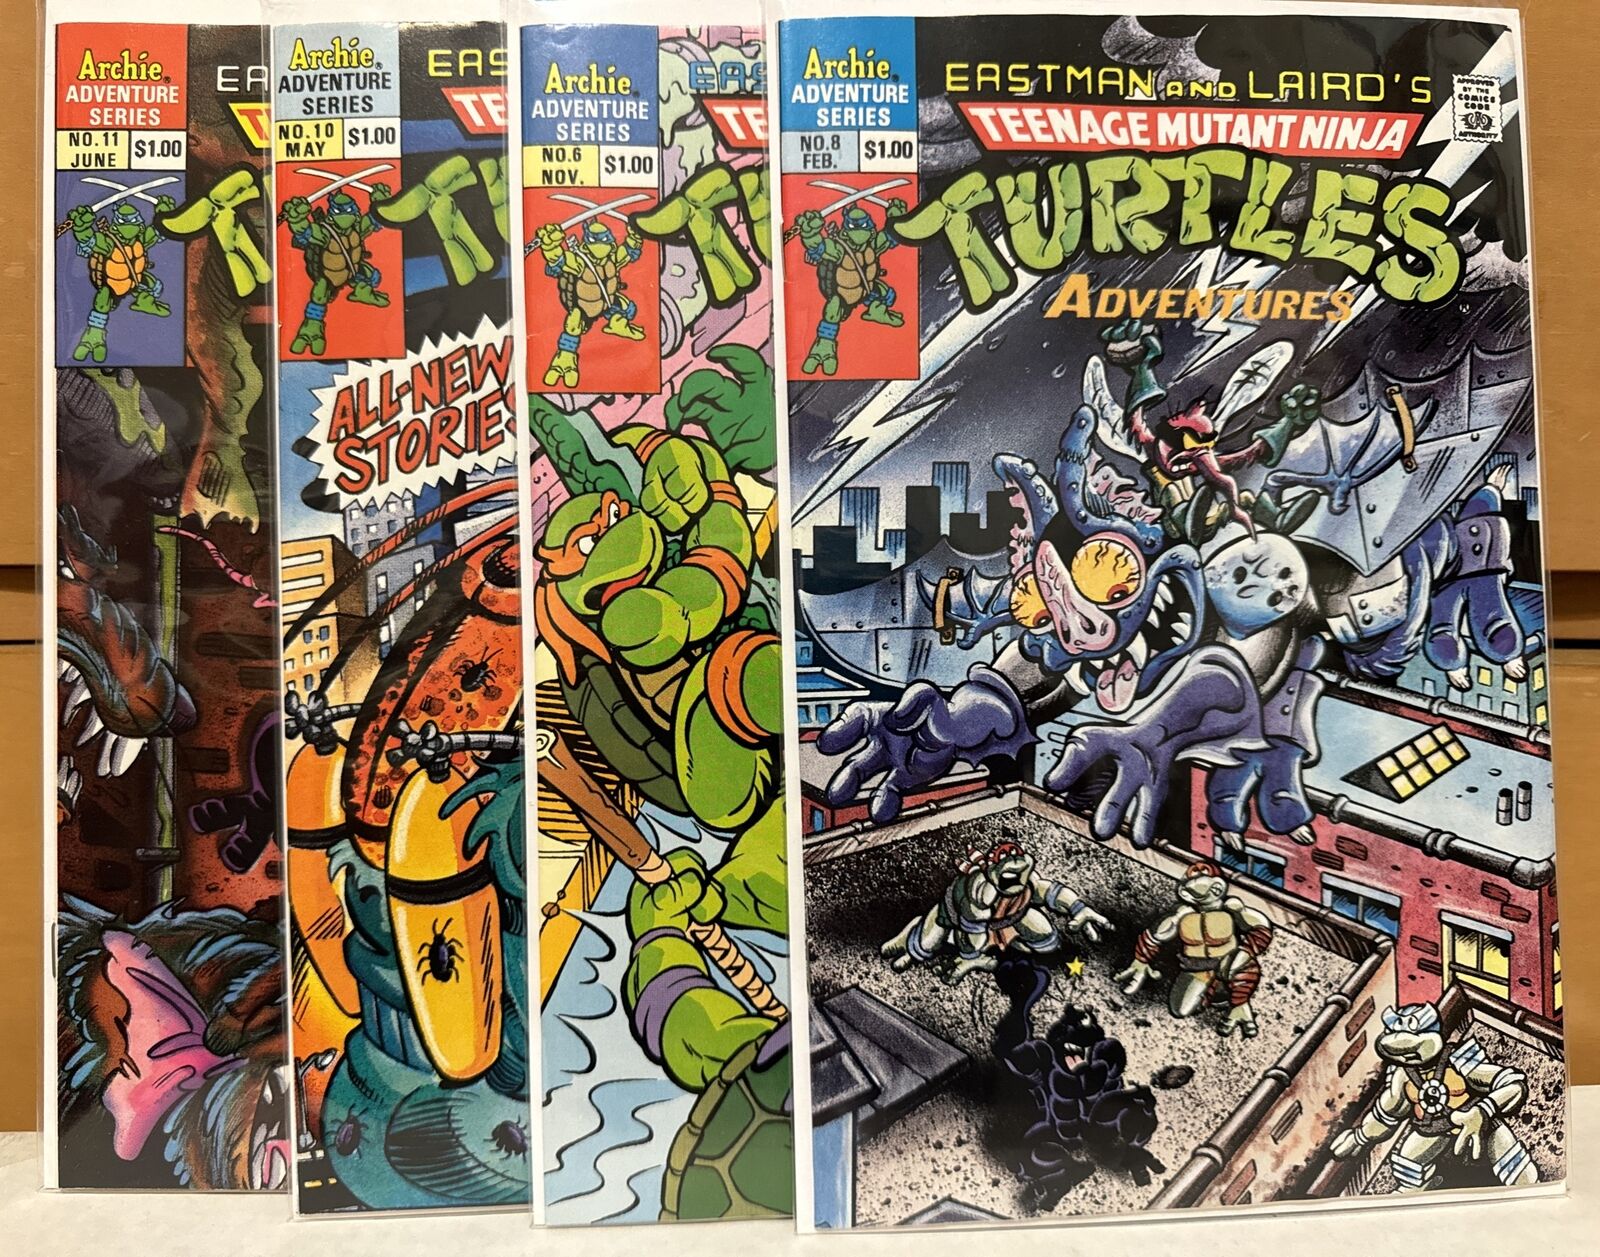 TMNT Comic Book Lot Of 4 Turtles Presents Archie Eastman And Lairds